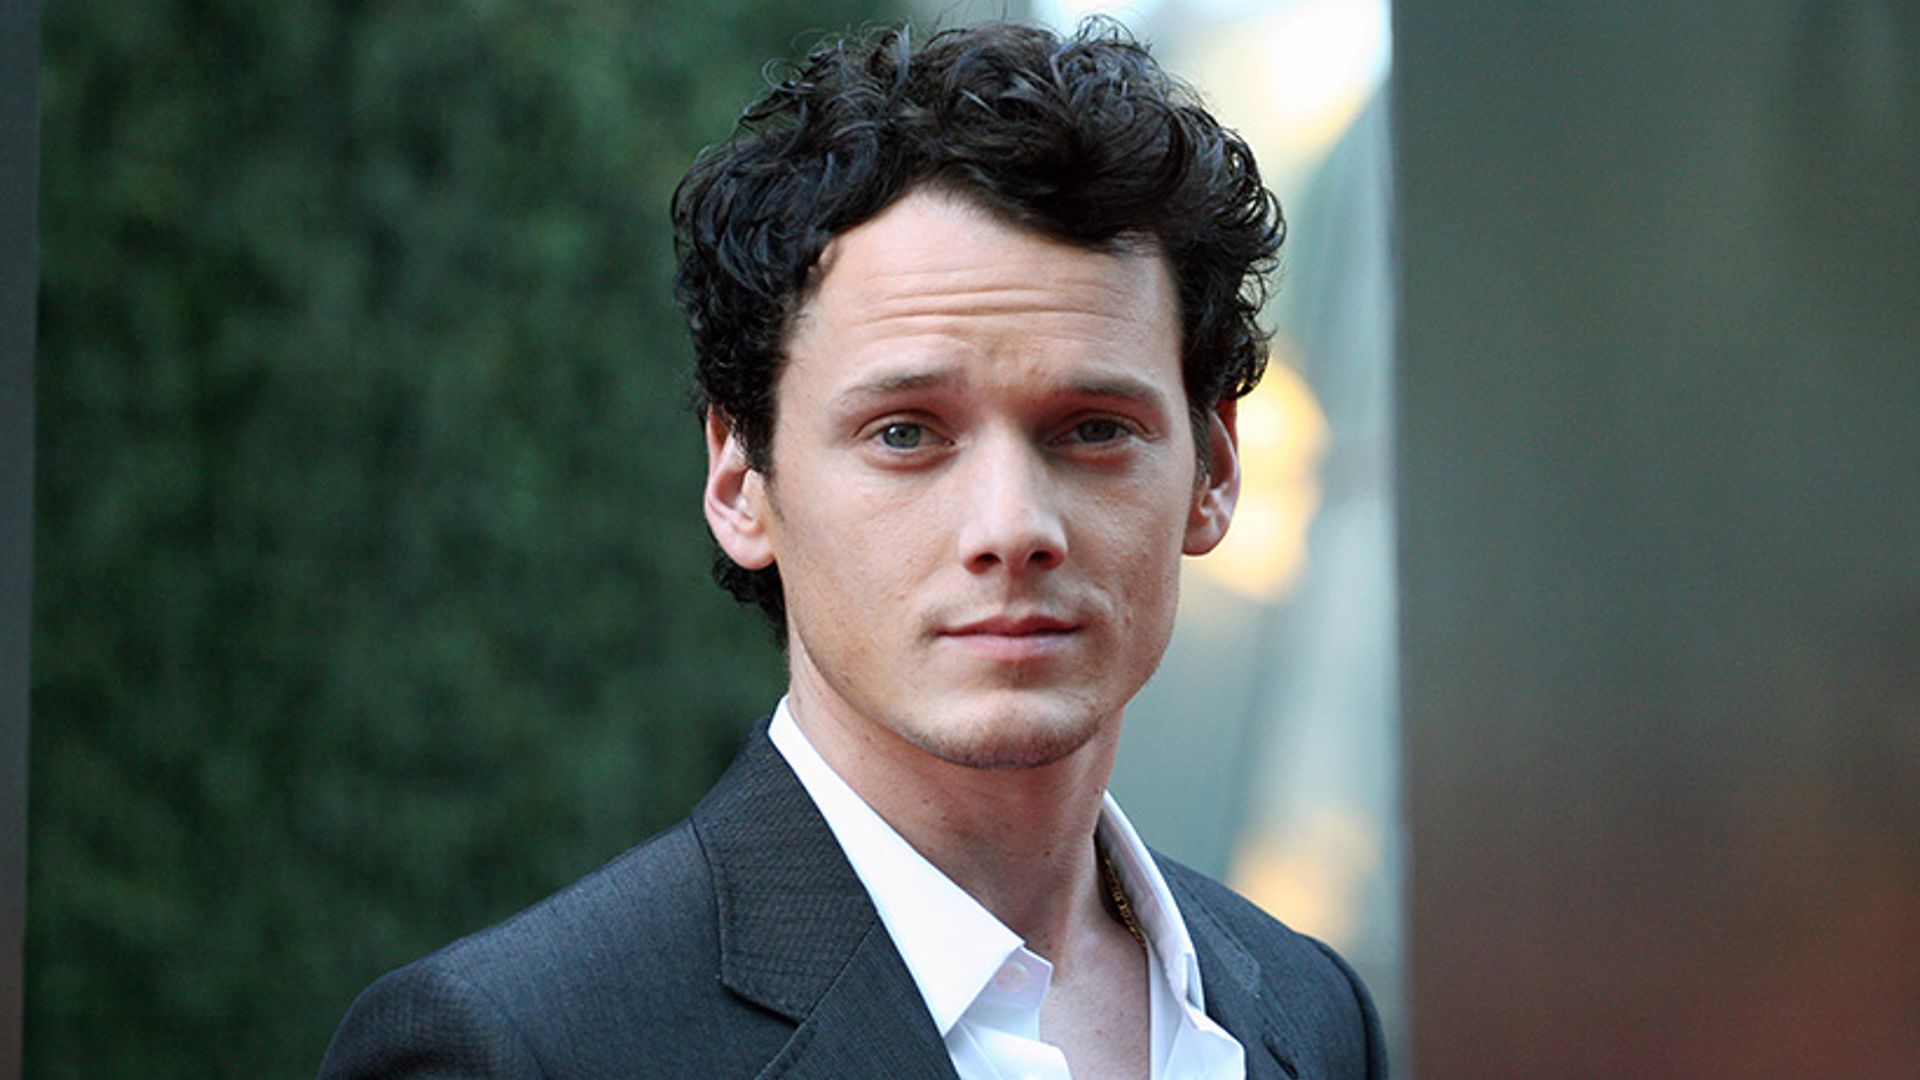 Hollywood pays tribute to Anton Yelchin following his shocking death aged just 27